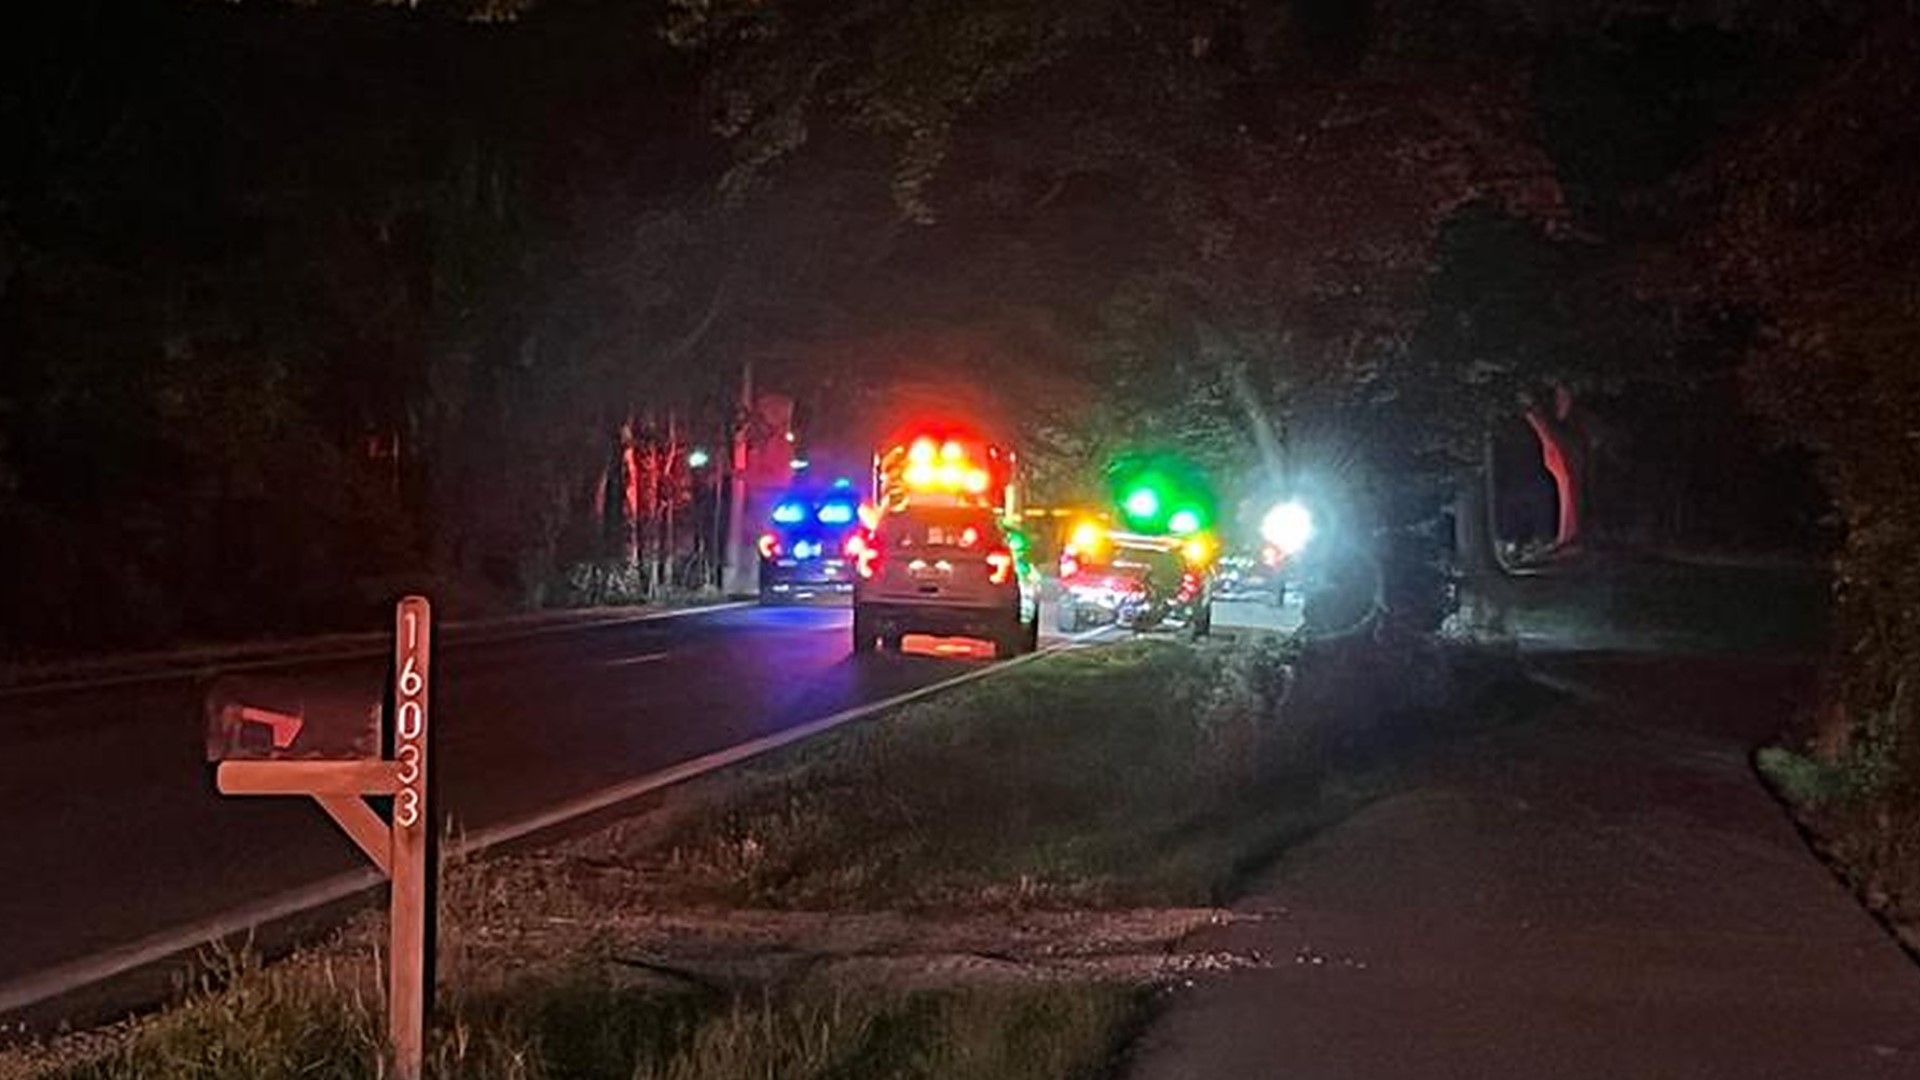 Police say the 16-year-old was driving on Riley Street when he lost control of the car, leaving the road and hitting several trees.